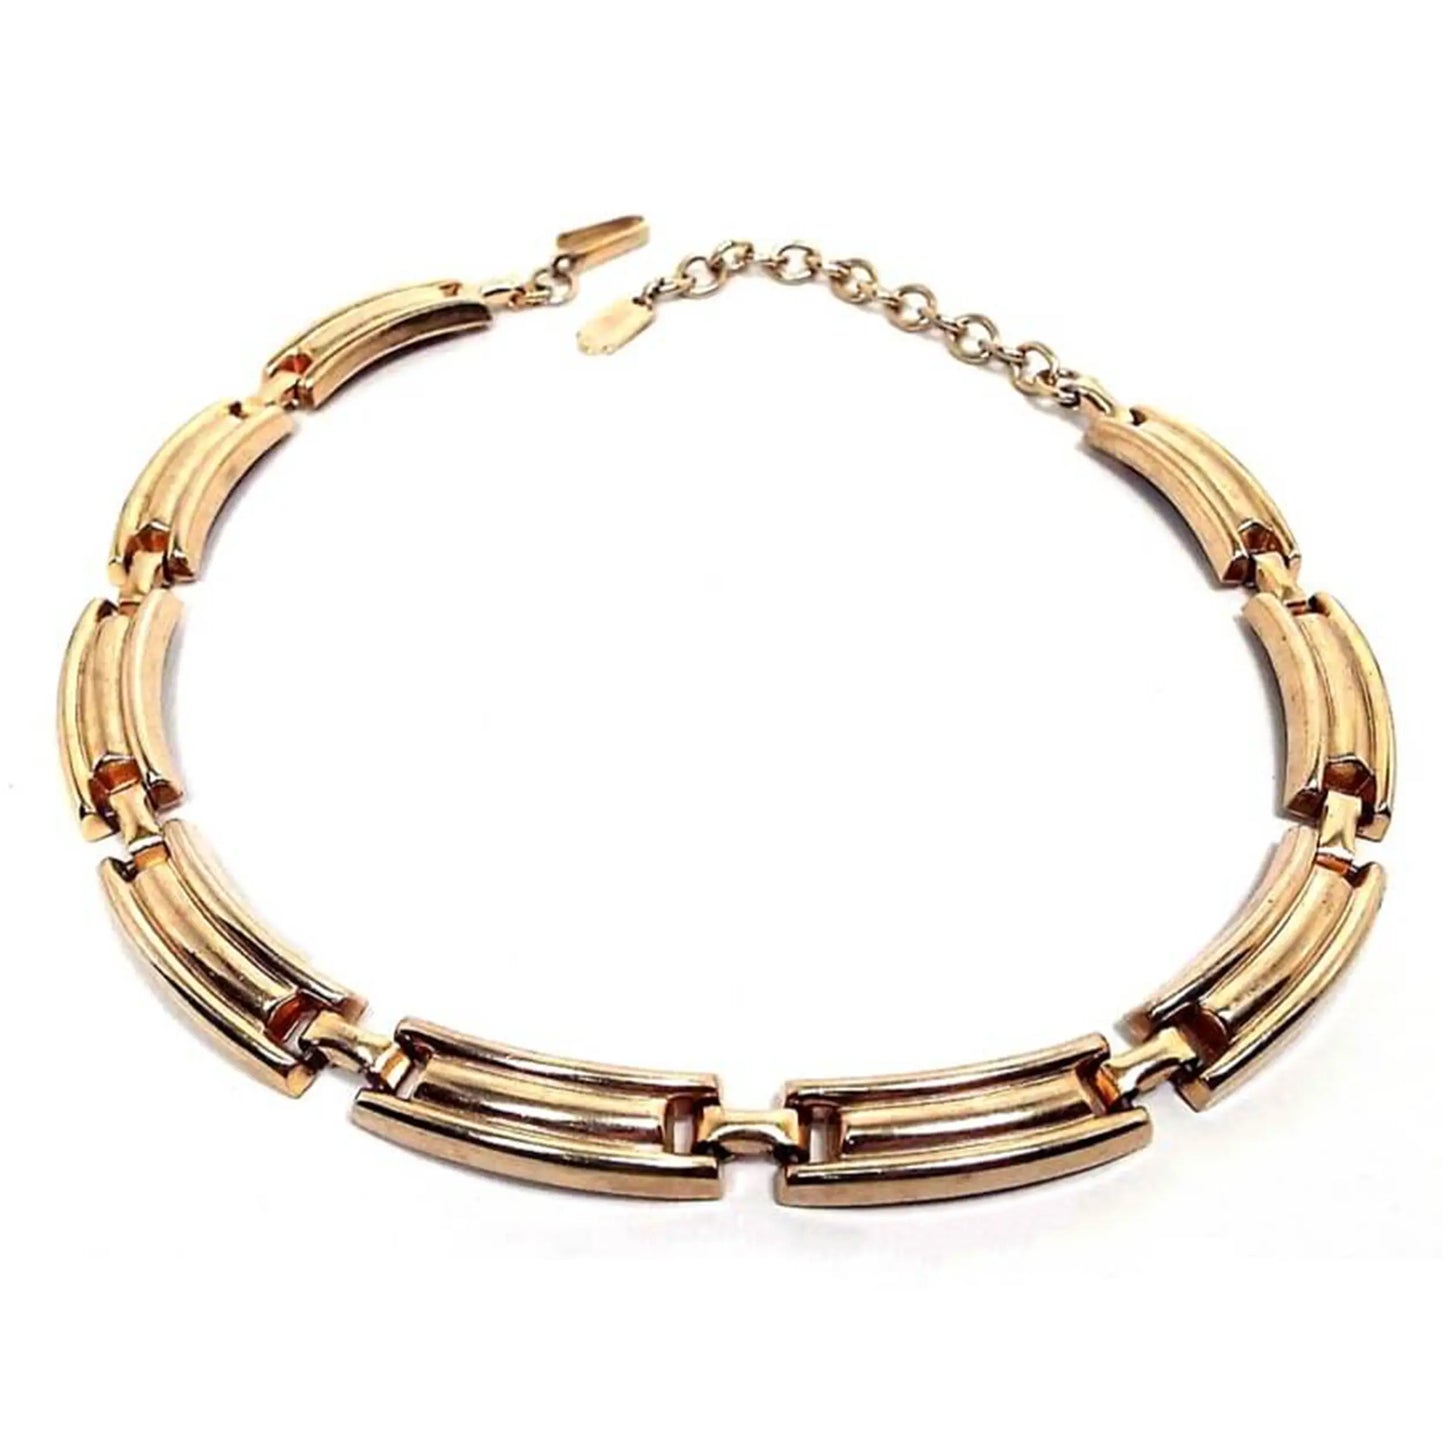 Front view of the Mid Century vintage Jaycraft link choker necklace. It is gold tone in color. There are curved rectangle links all the way to the hook clasp and chain end. There is a hang tag at the end of the chain.